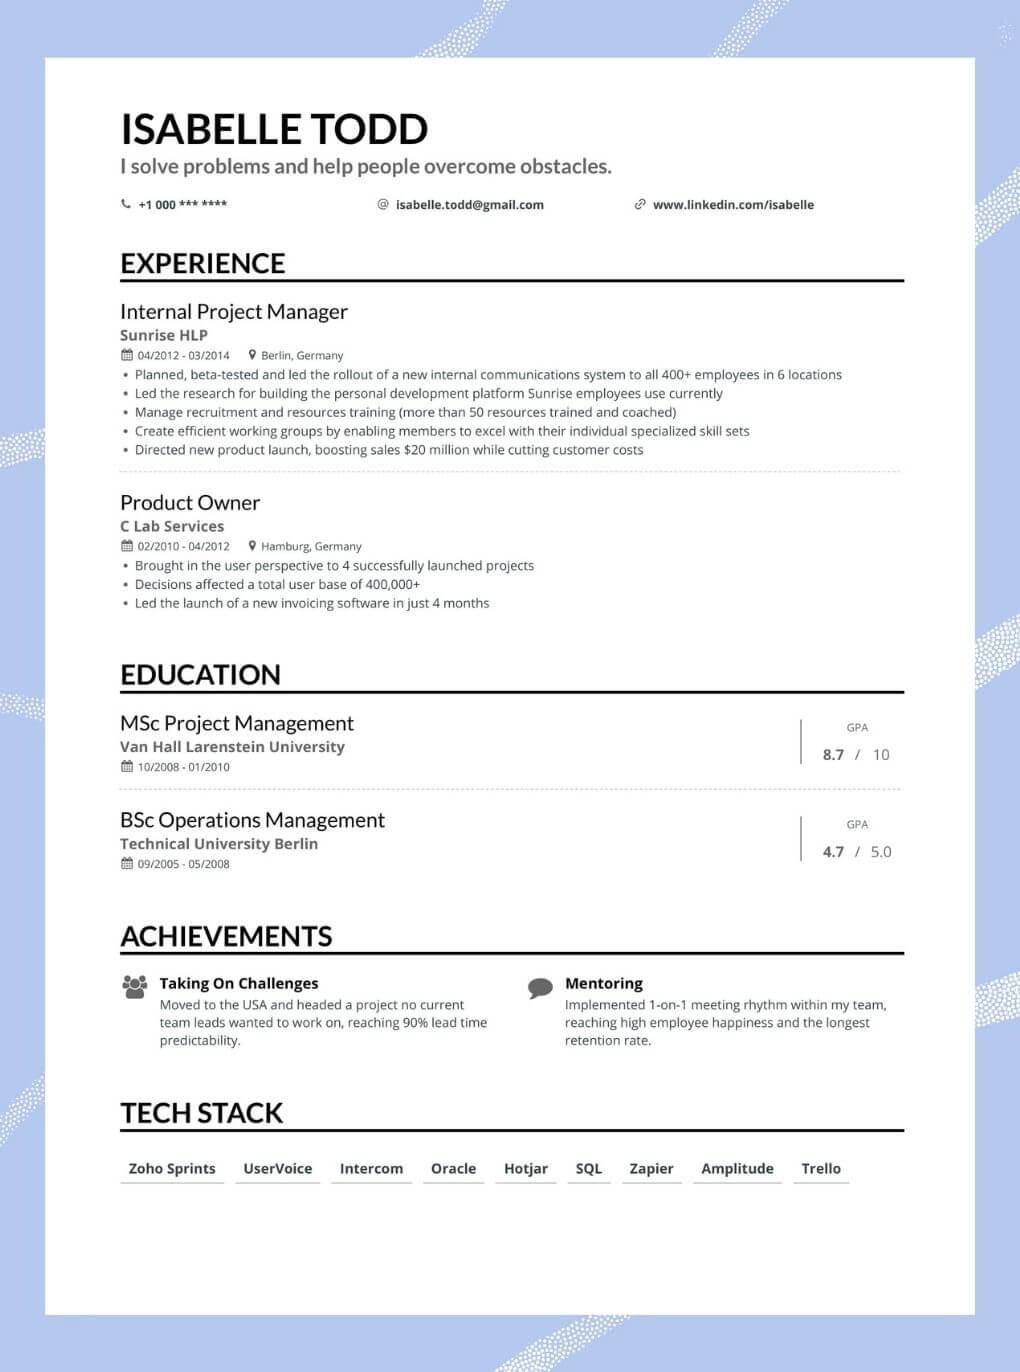 Reverse Chronological Resume Template Free Download How to Decide On Using A Reverse Chronological Resume